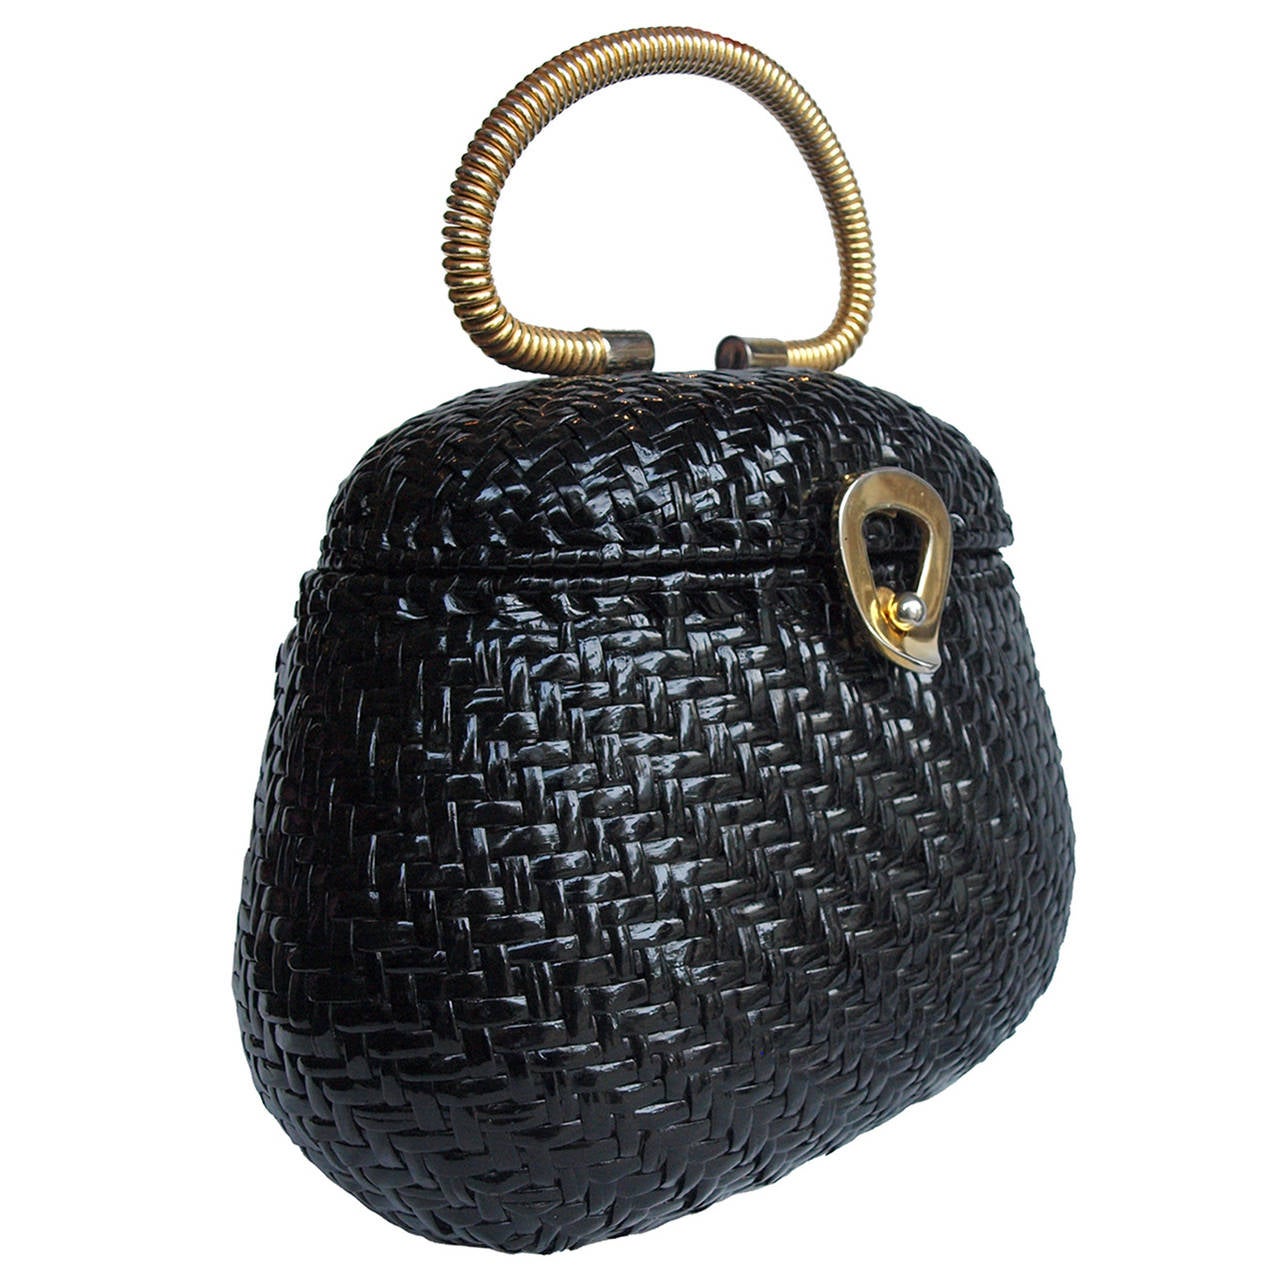 This is an unusual 60's box bag. It is made up of strips of black patent material woven through each other. It has gold metal trimming as well as a gold handle at the top. There is slight fading to the gold of the tear drop clasp, however it is